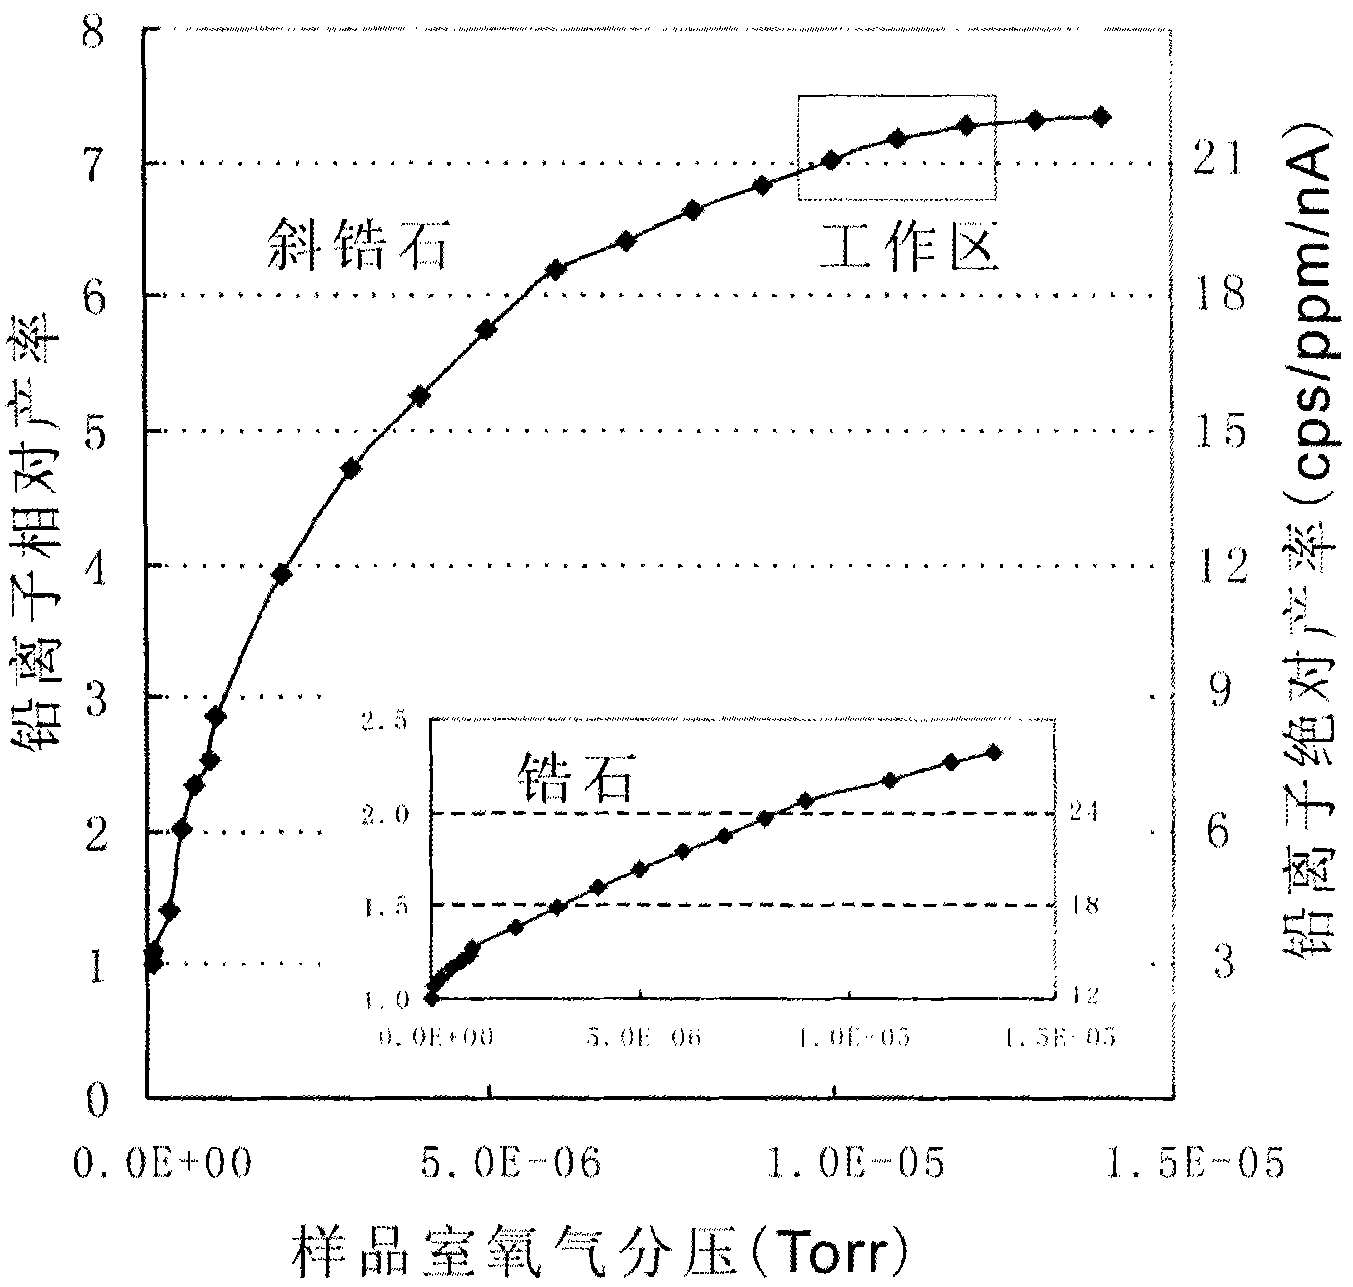 Method for uranium lead dating of baddeleyite by using secondary ion mass spectroscopy